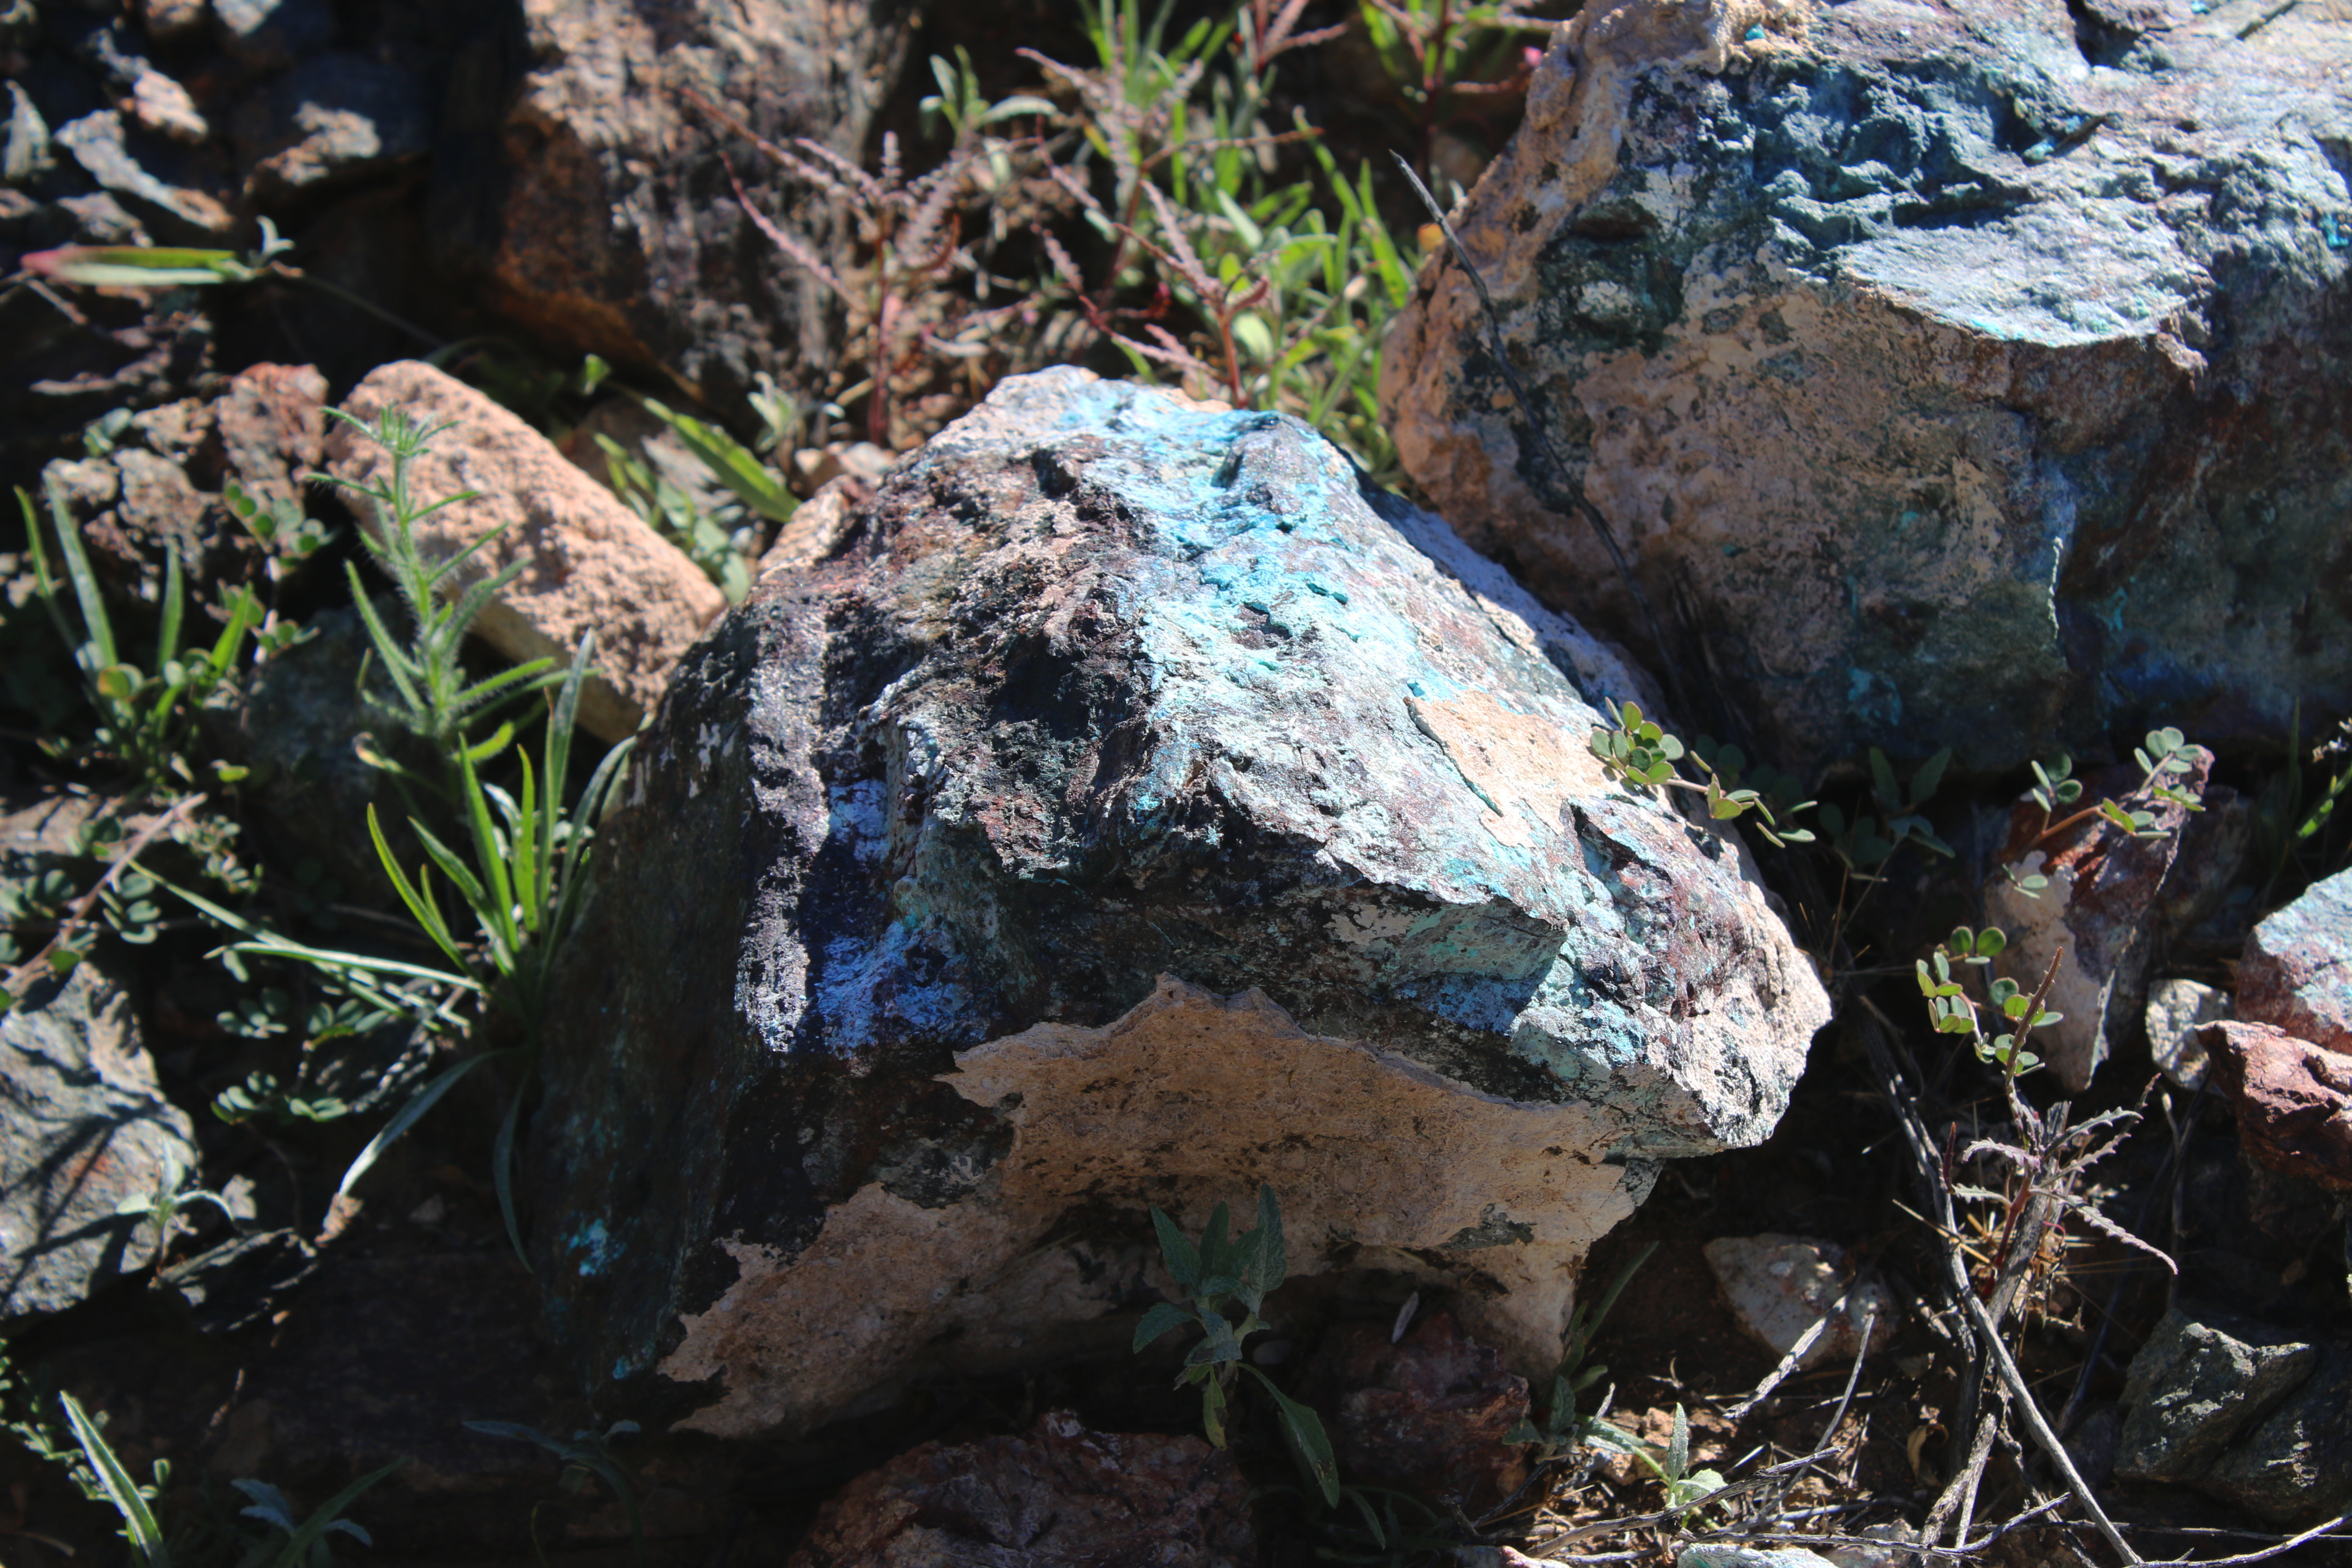 Pieces of gray chrysocolla with turquoise-colored streaks.